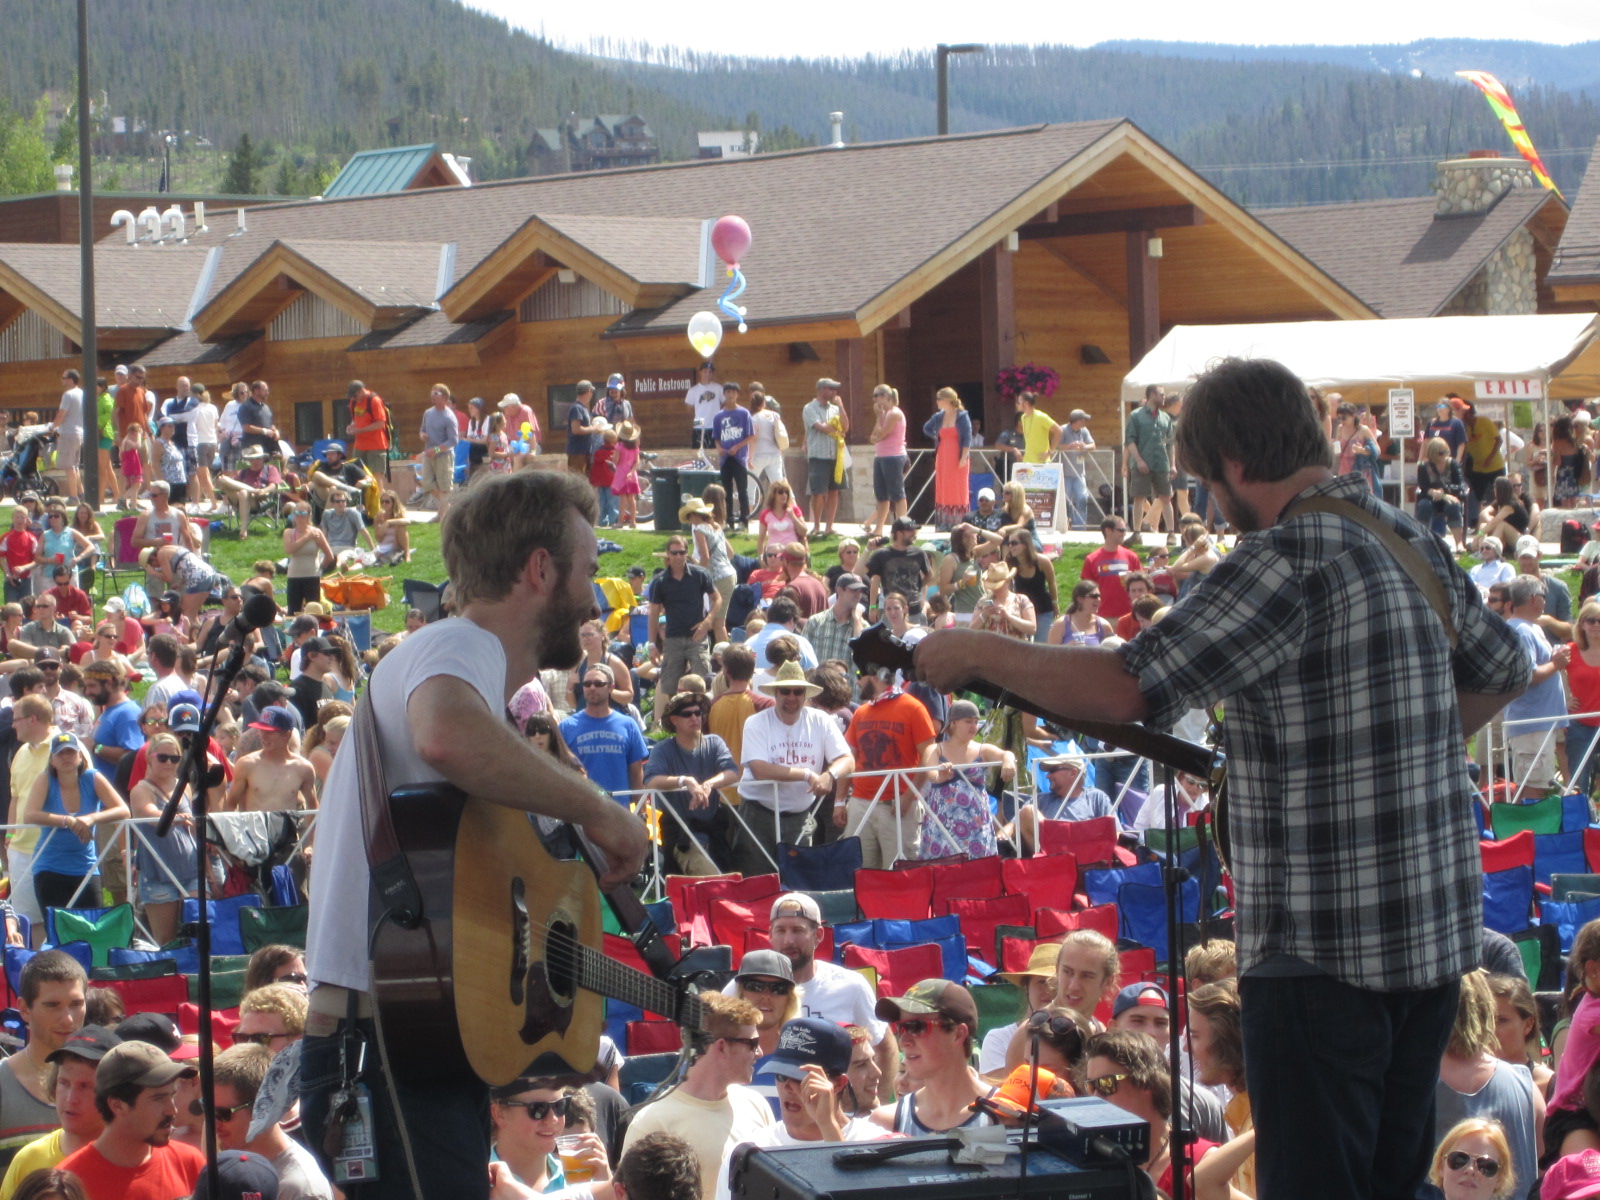 SolShine is one of Winter Park, Colo.'s signature events.